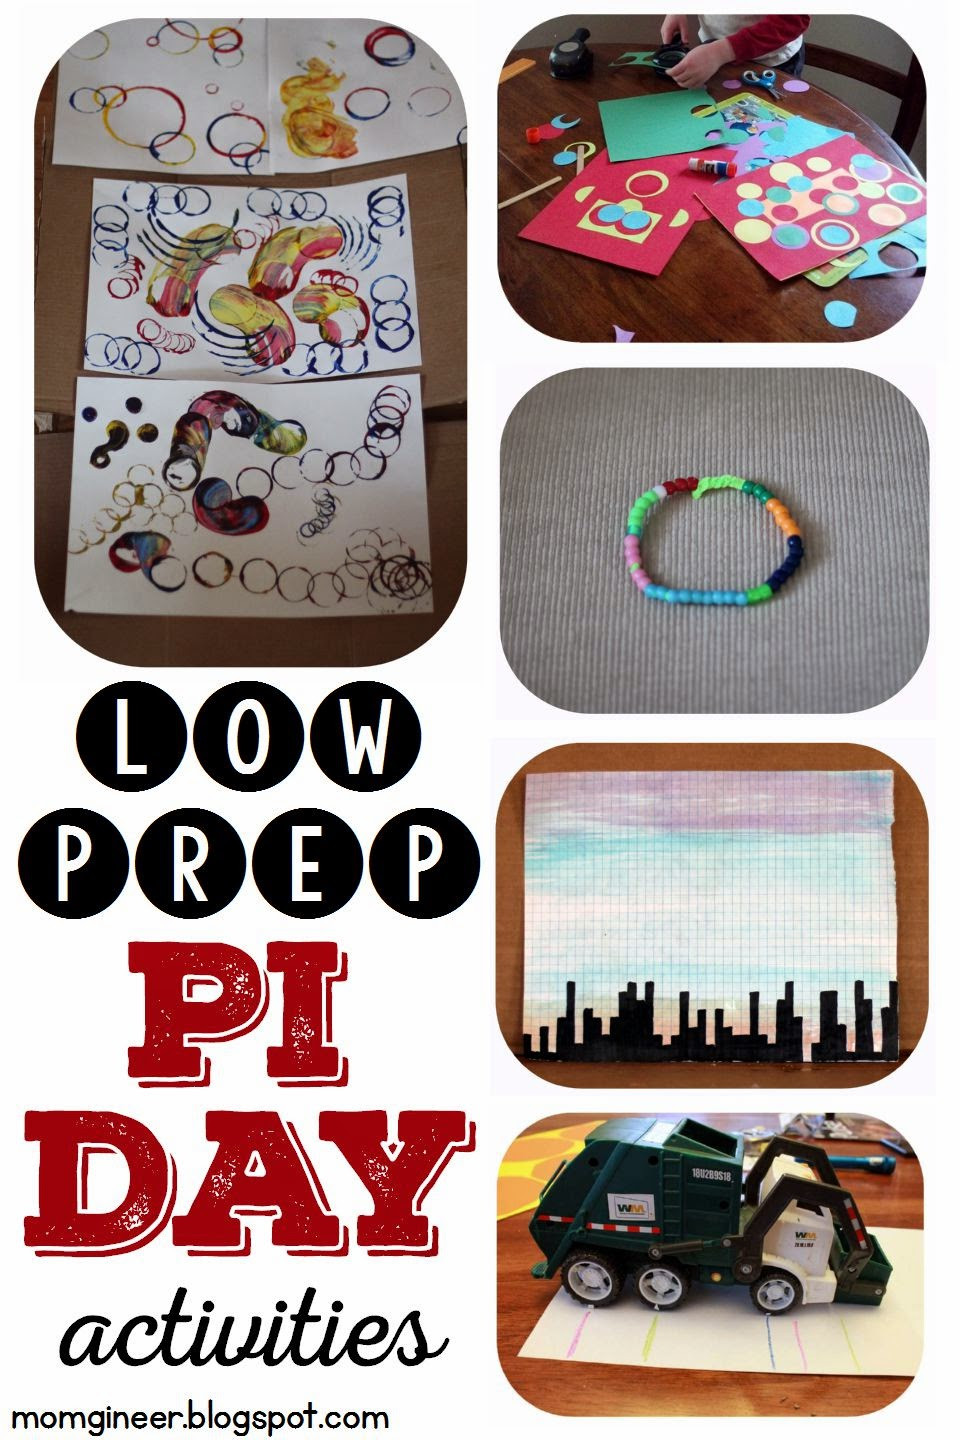 3.14 Pi Day Activities
 Pi Day is on its way Pi Day Activities momgineer